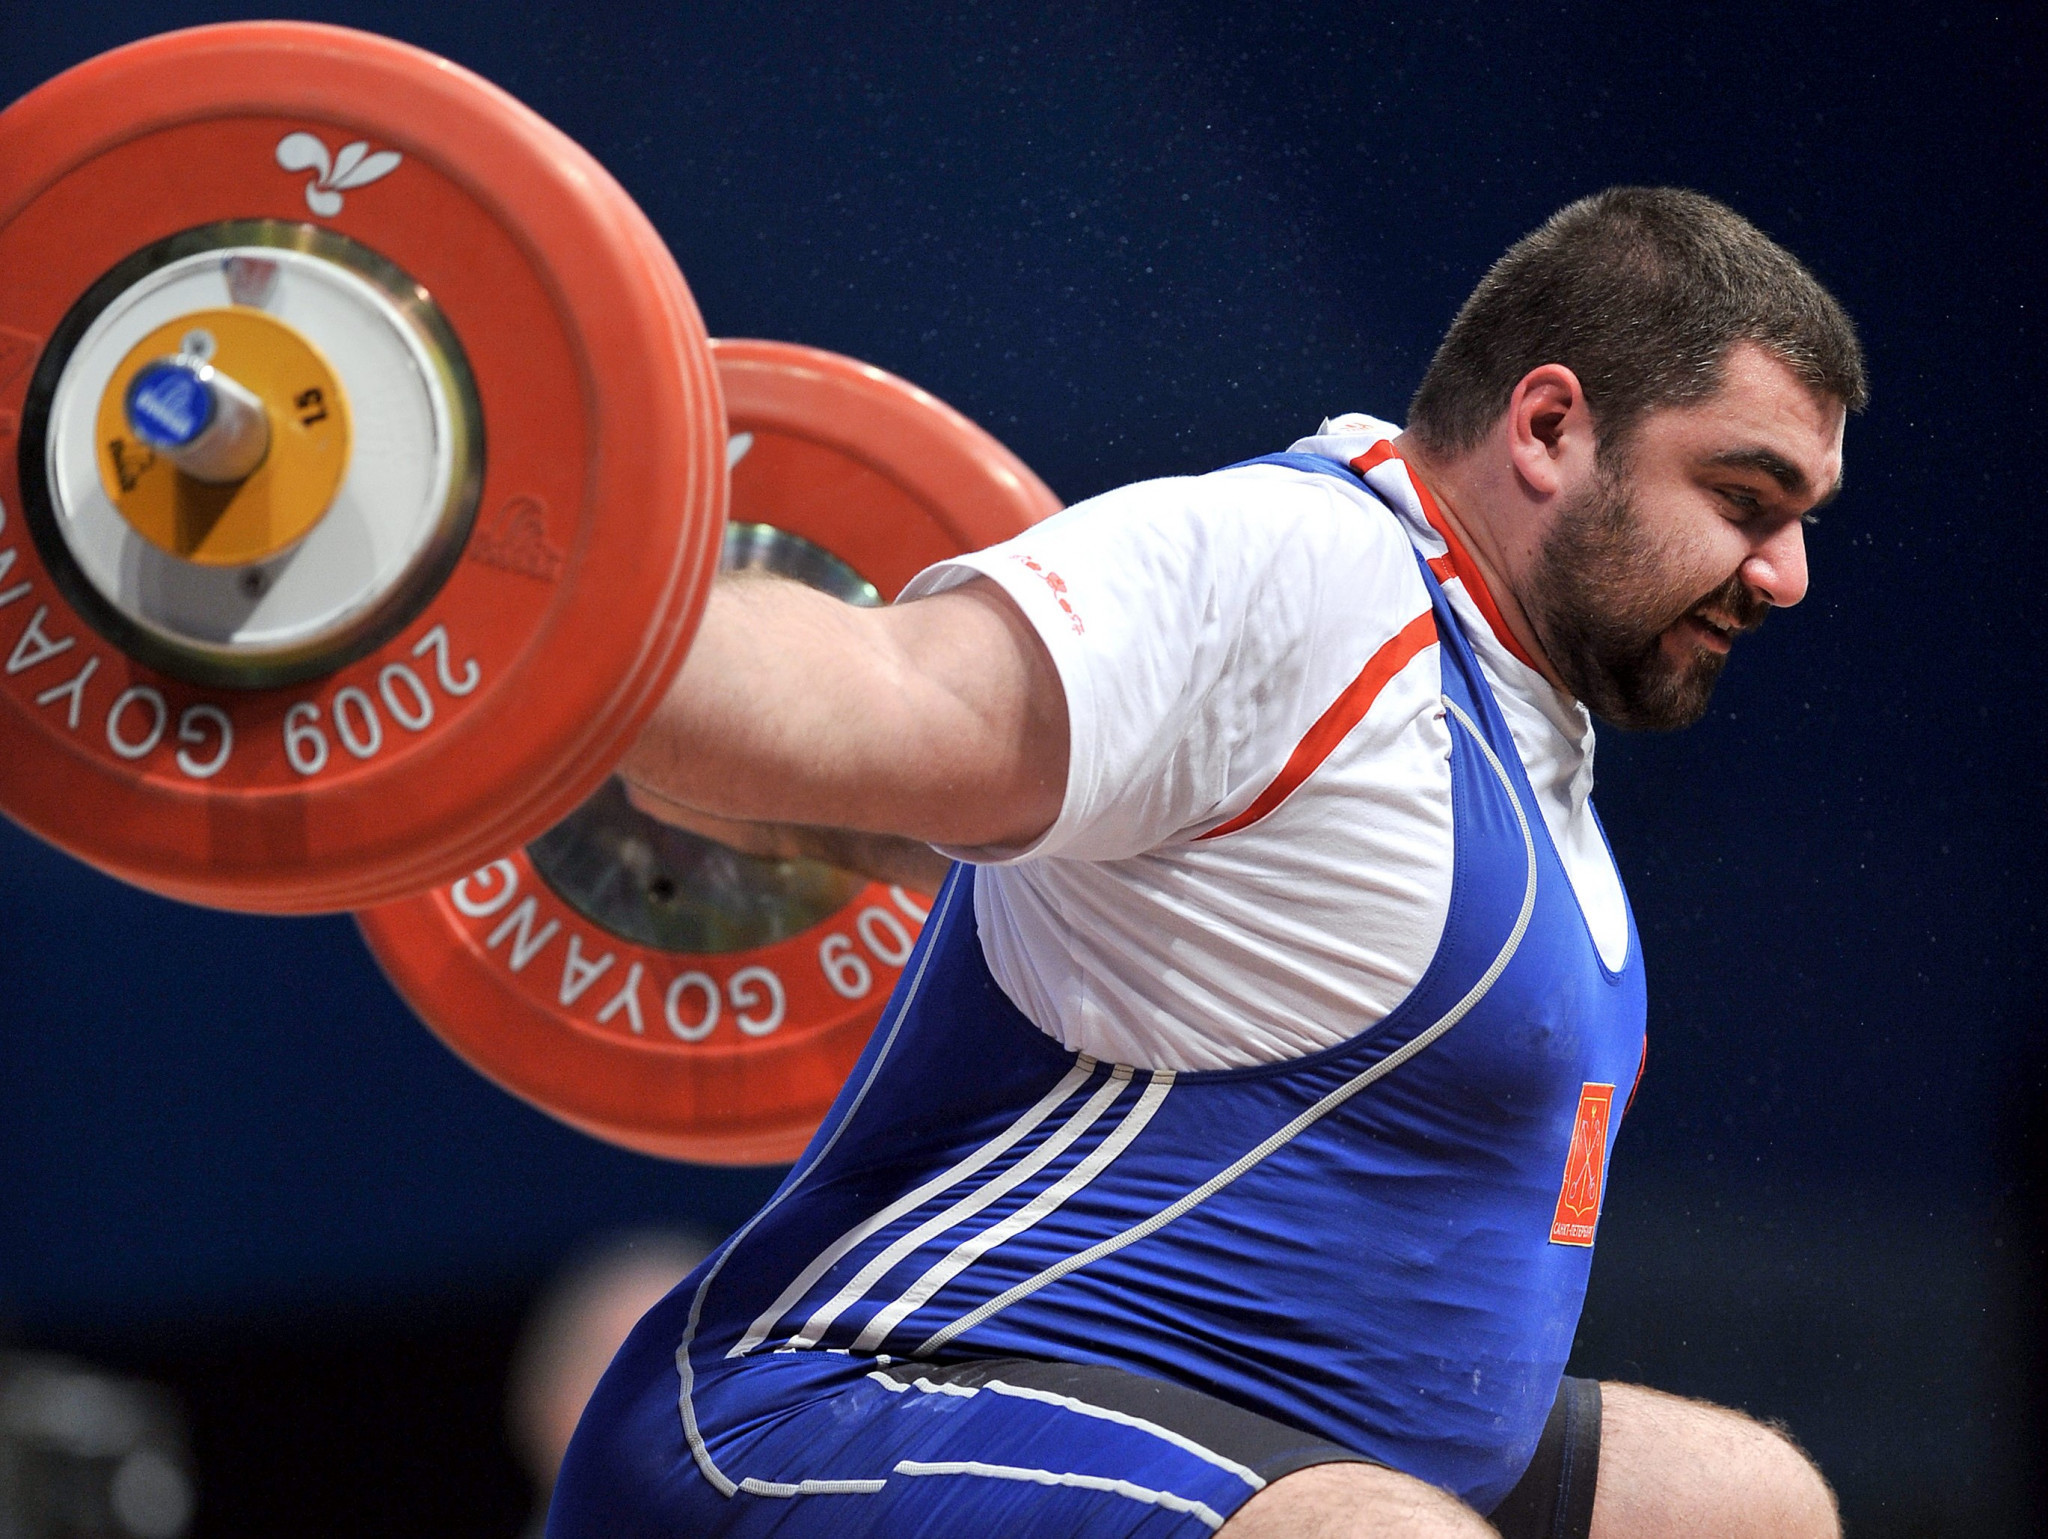 Russian weightlifters who won European medals charged with doping violations